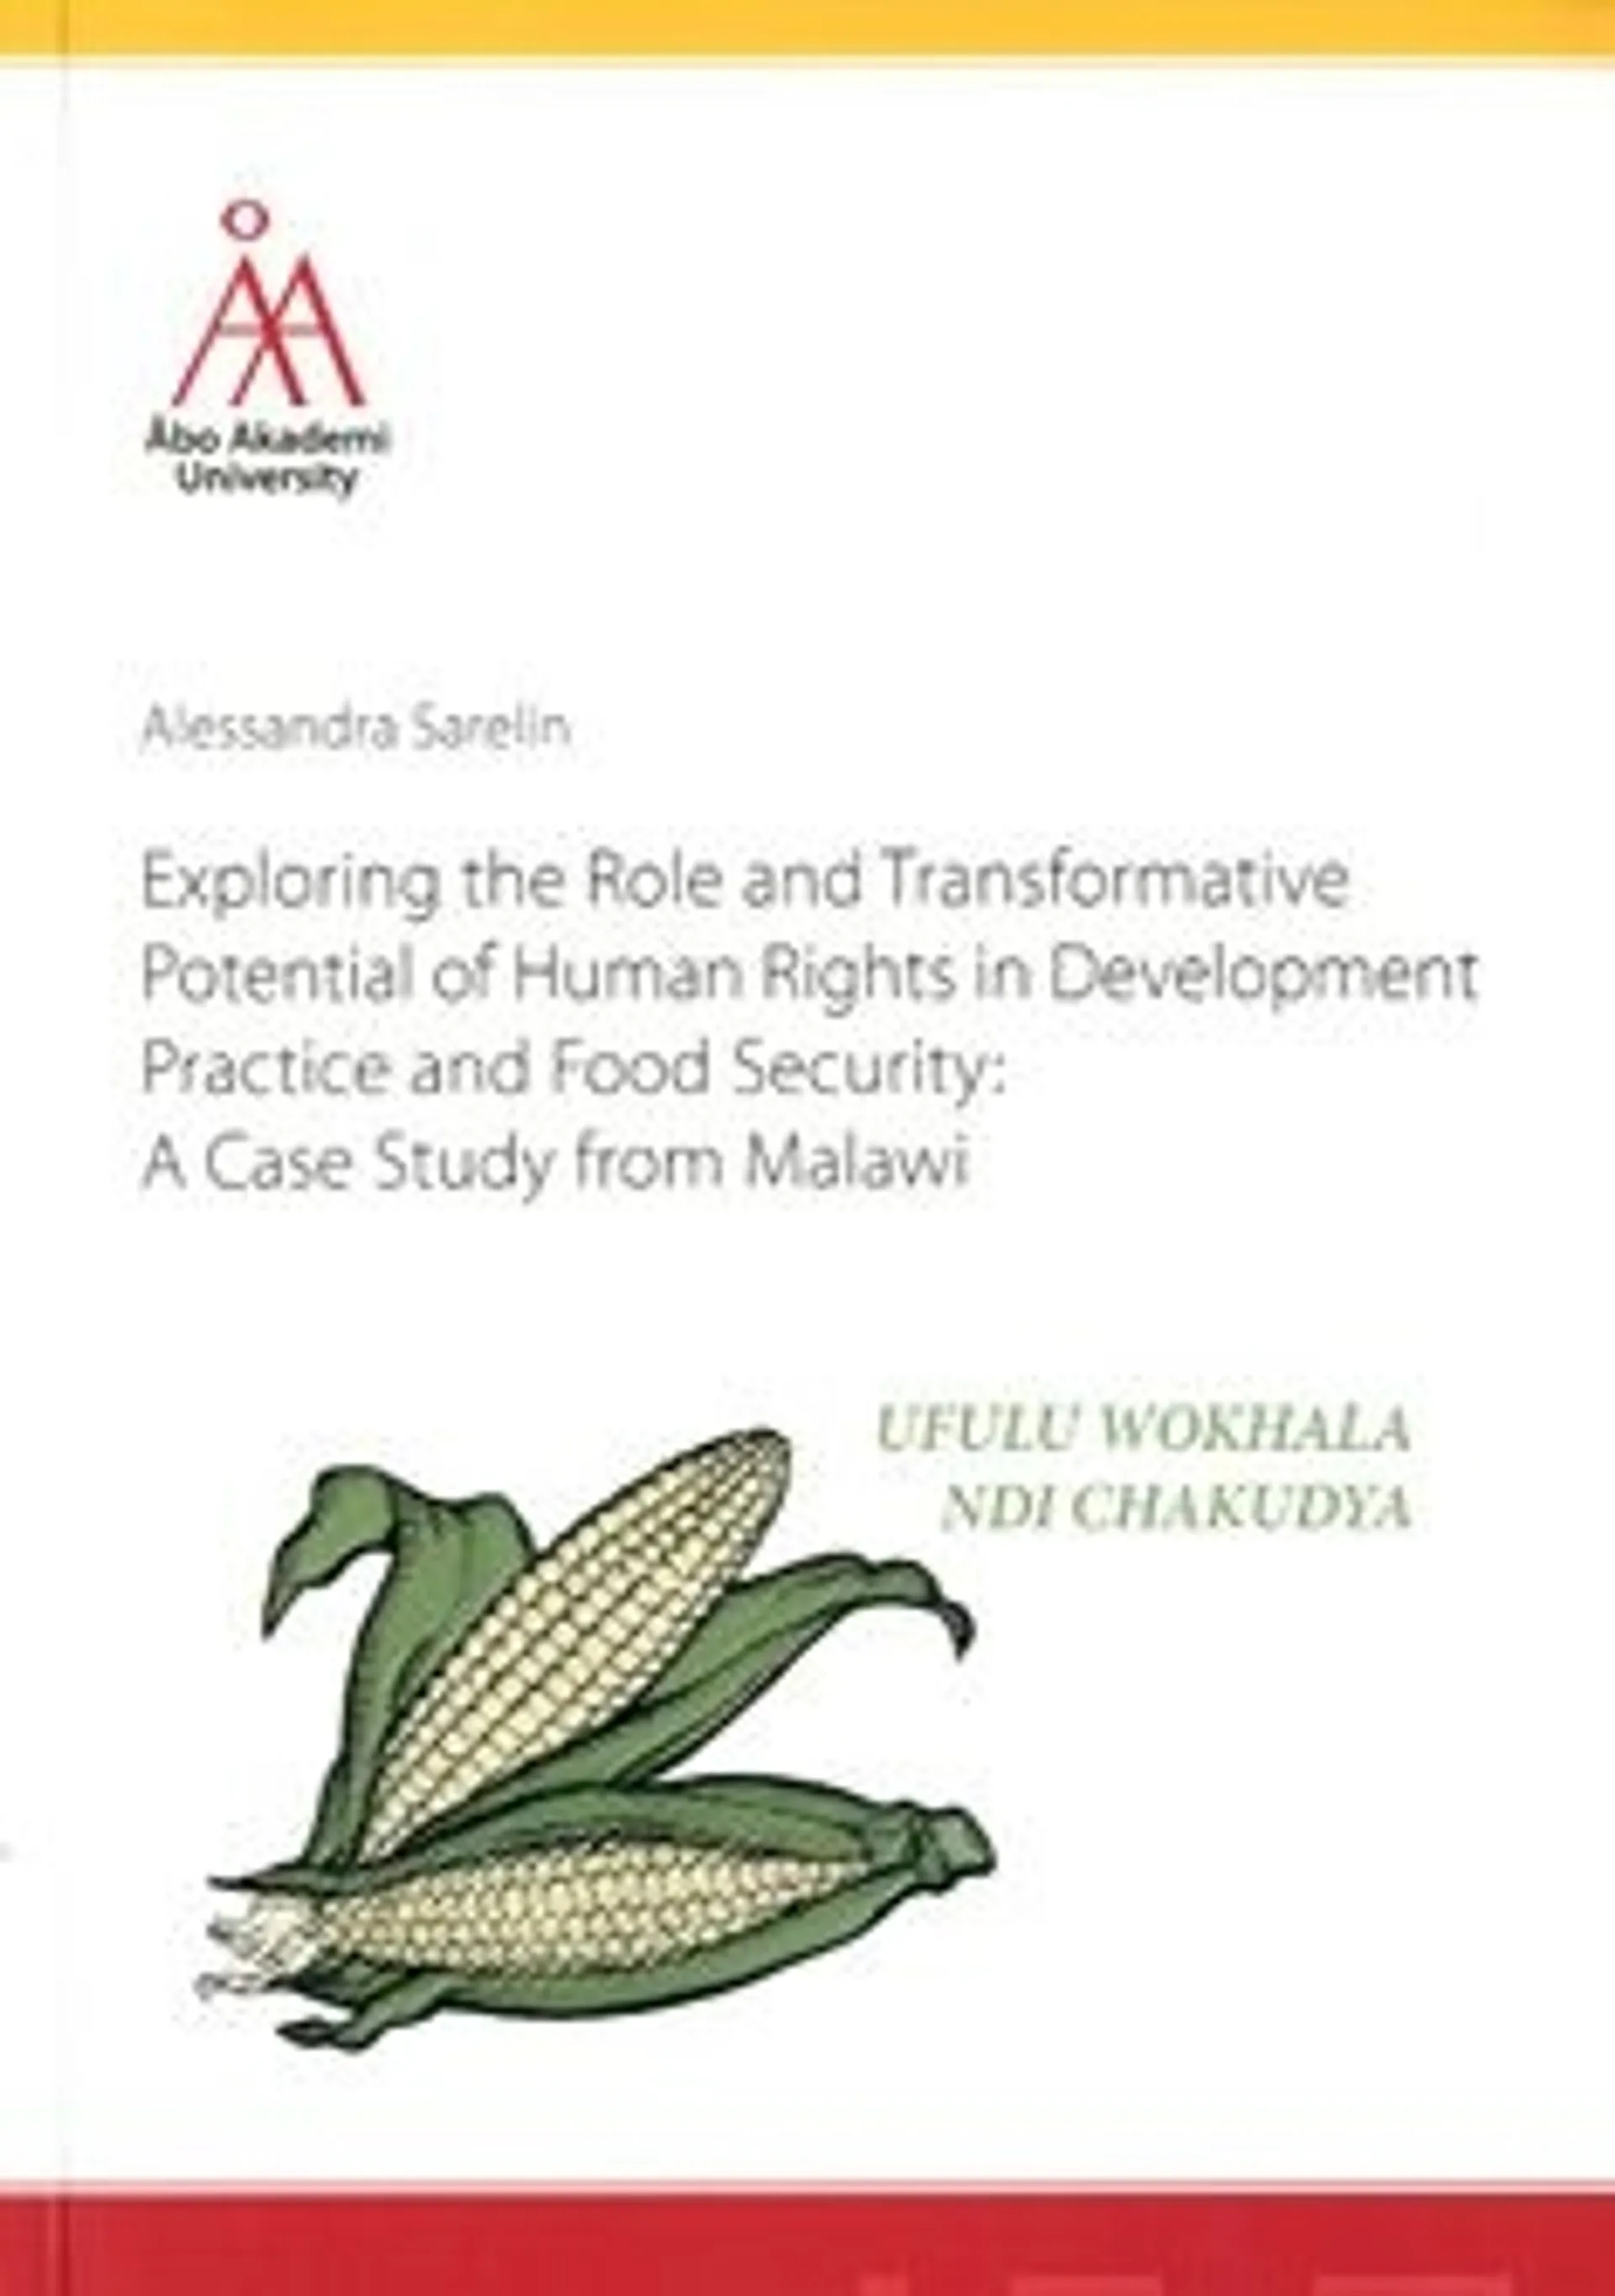 Sarelin, Exploring the Role and Transformative Potential of Human Rights in Development practice and Food Security